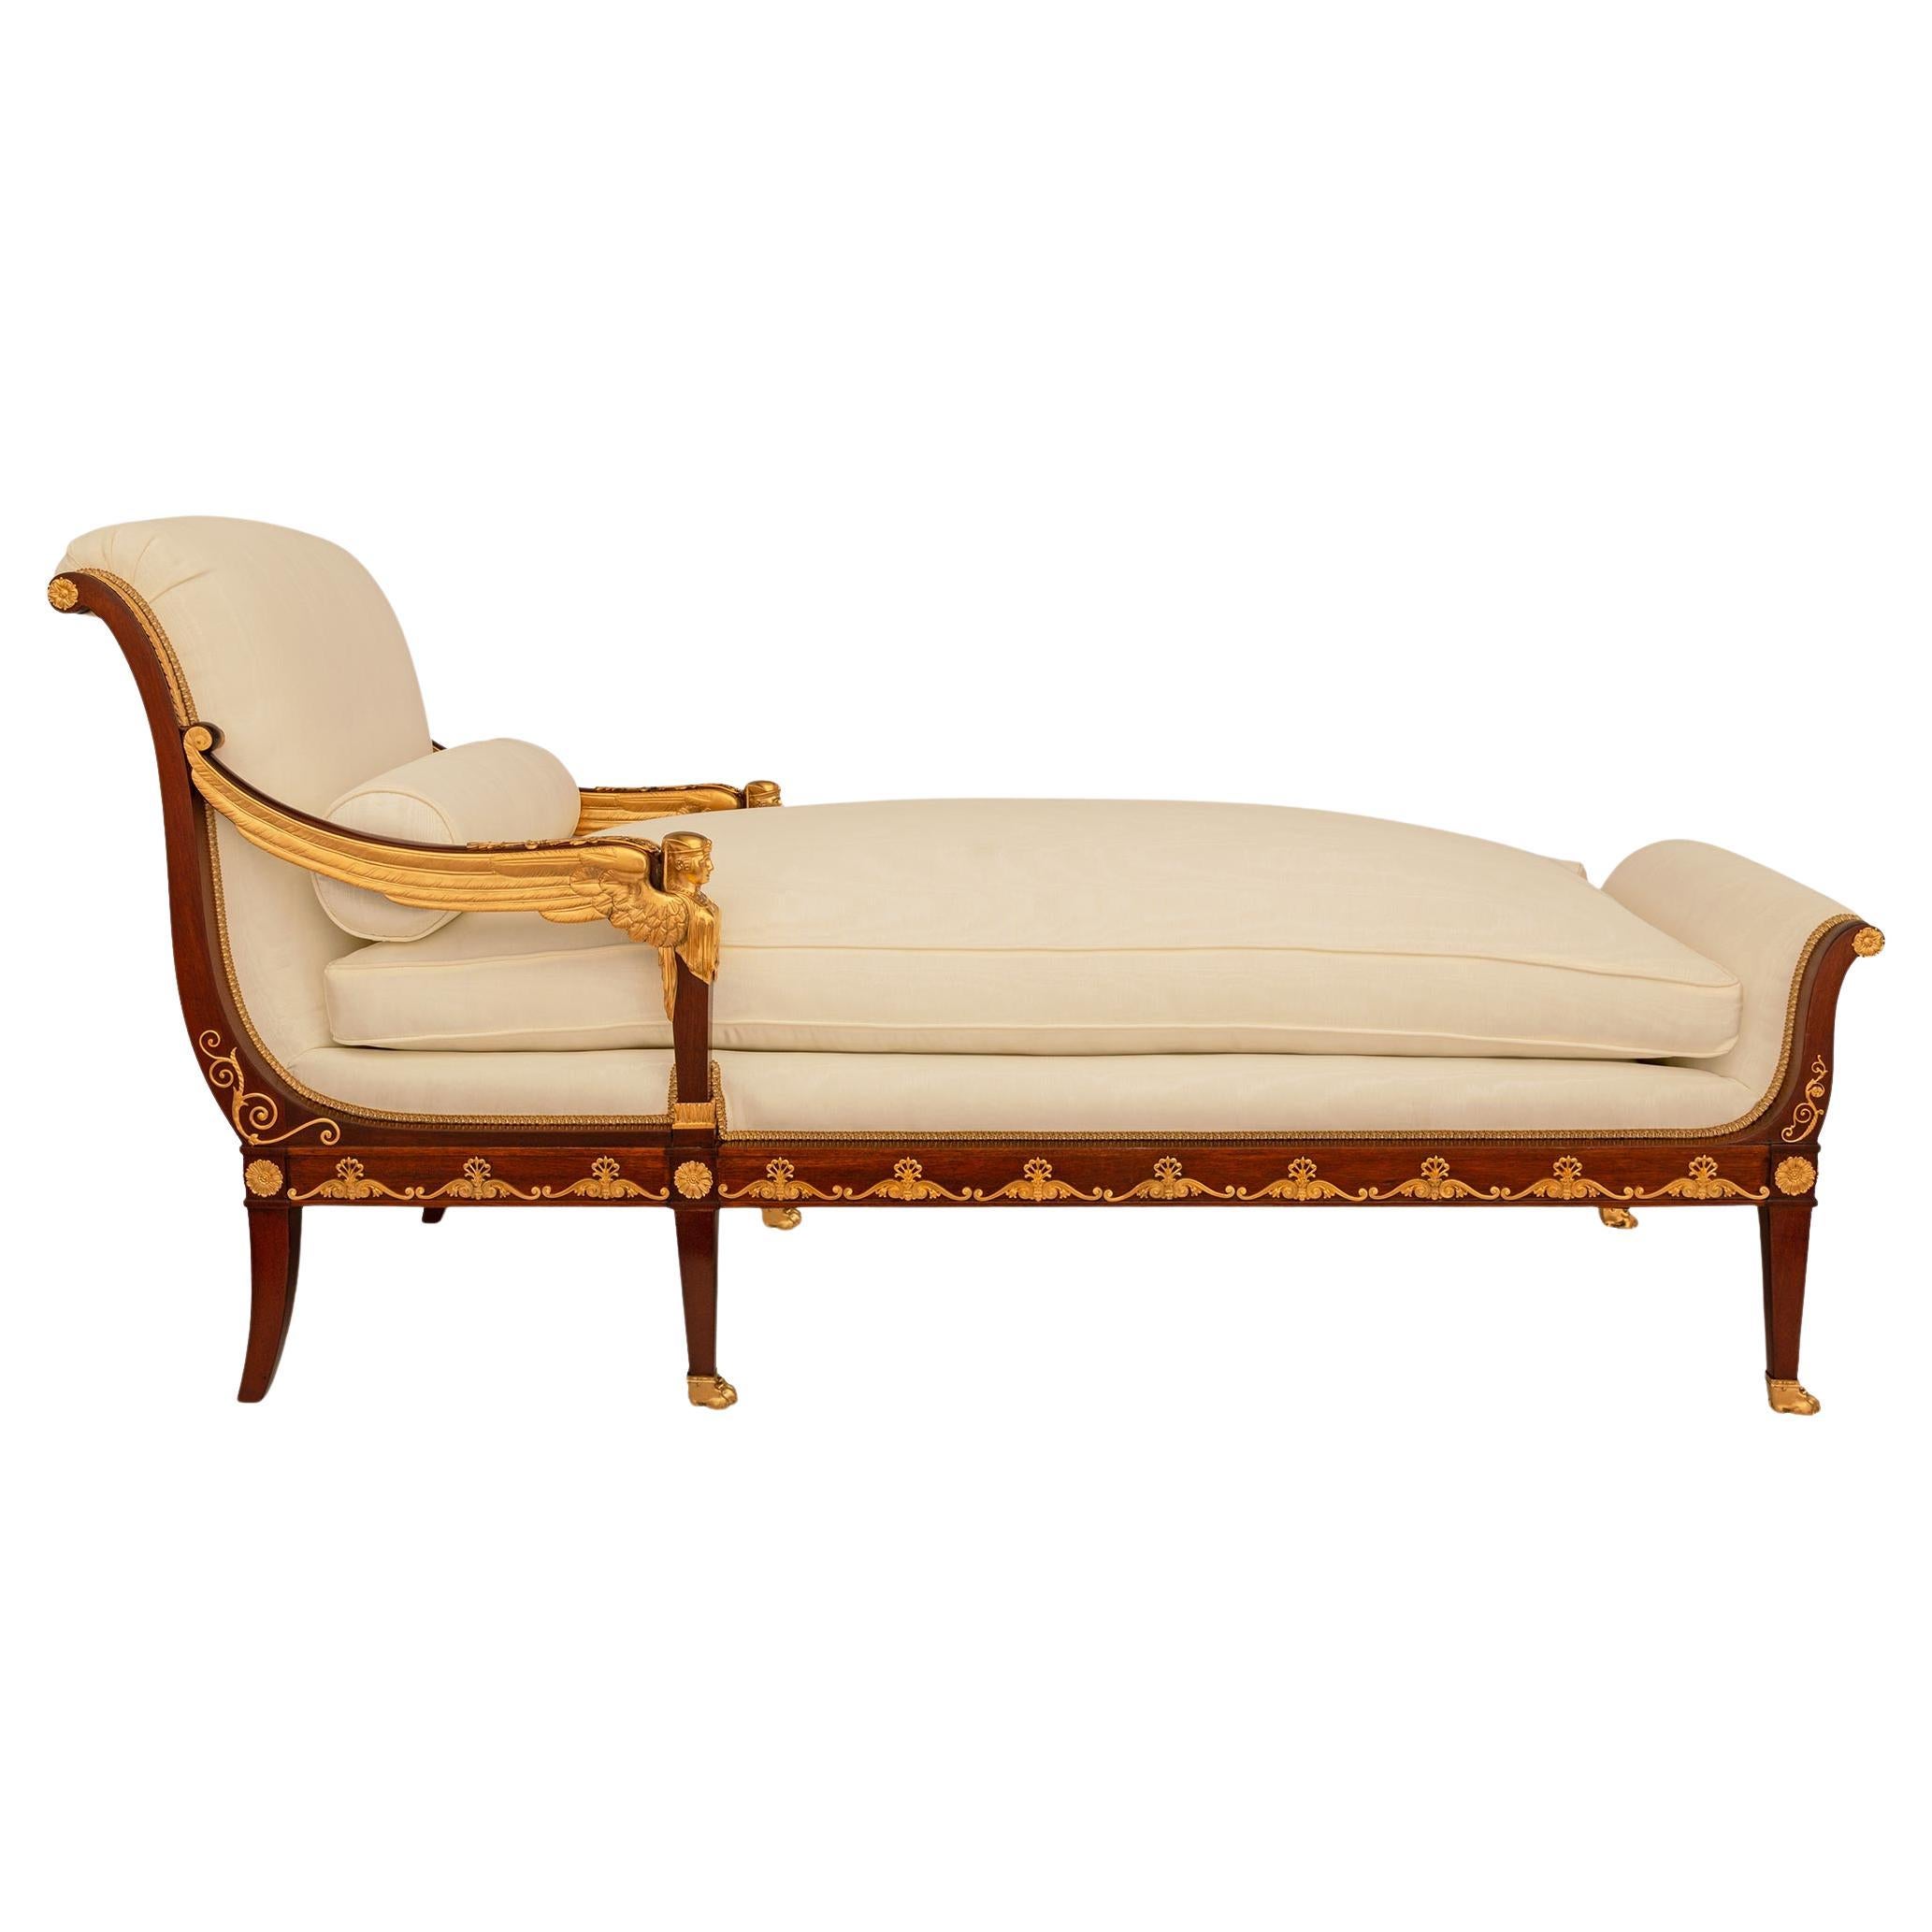 French early 19th century Empire period Mahogany and Ormolu chaise, Circa 1805 For Sale